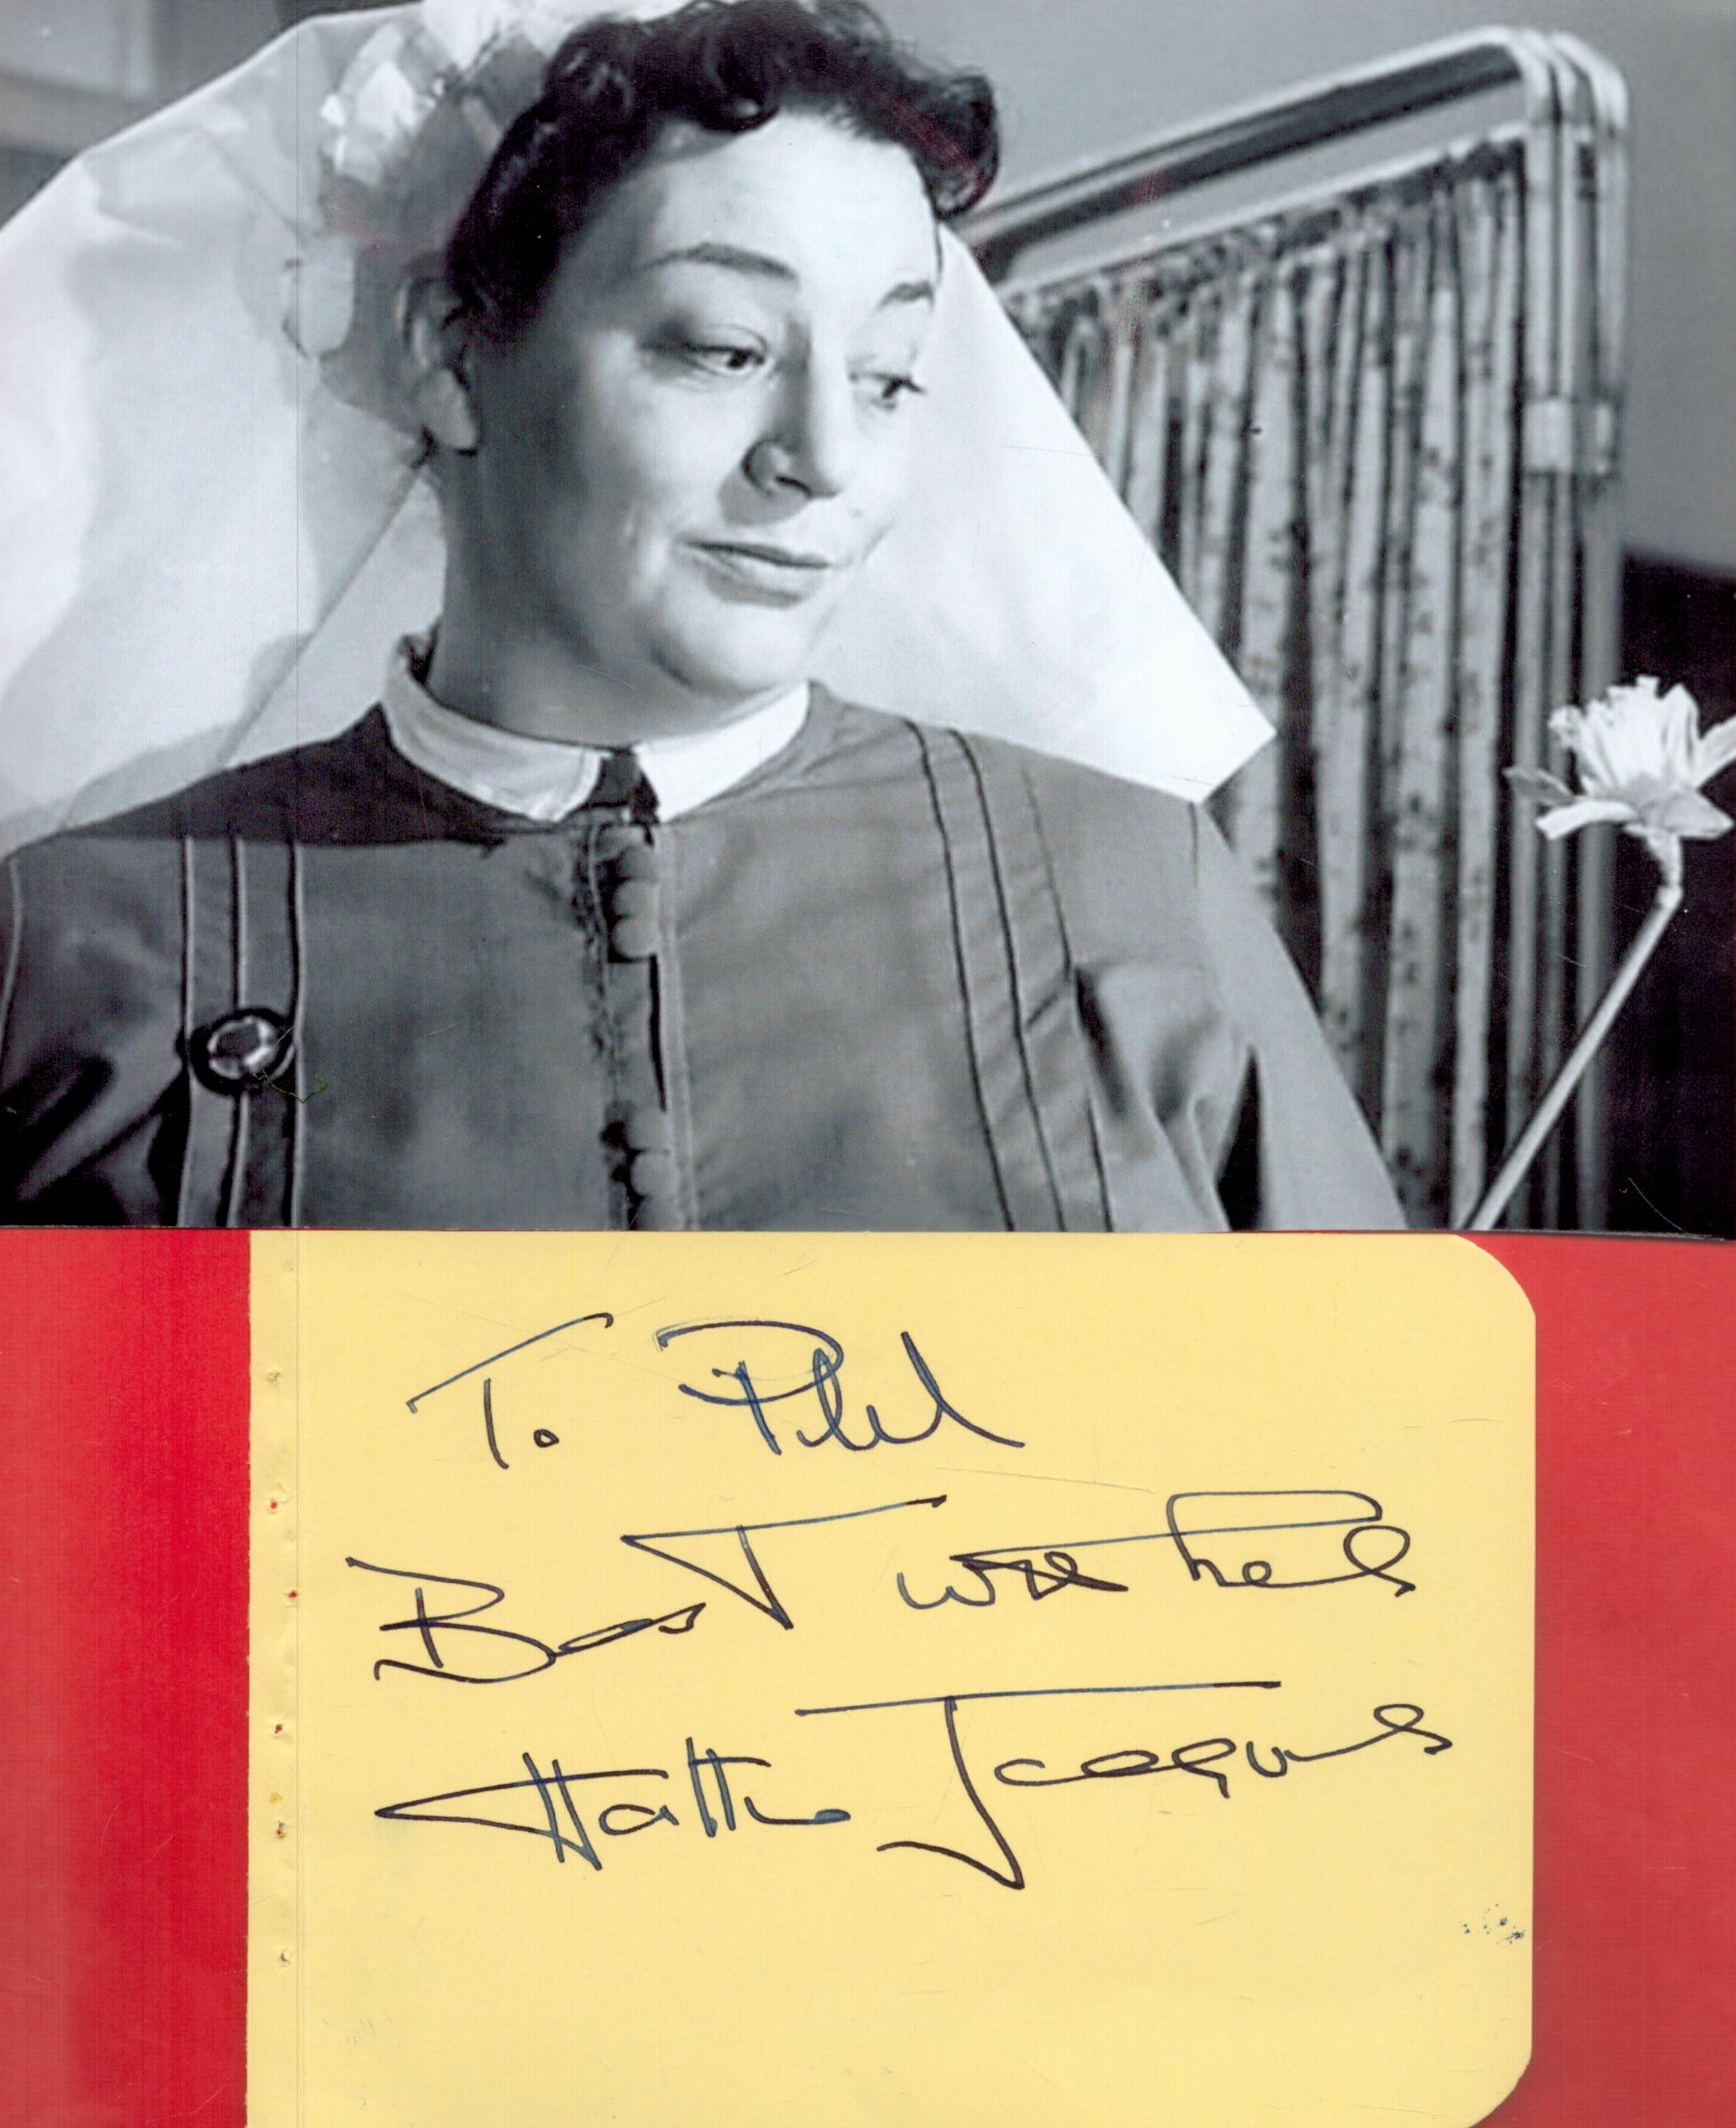 Hattie Jacques Signed Yellow 5x3 inch approx Autograph album Page. Signed in dark blue ink,